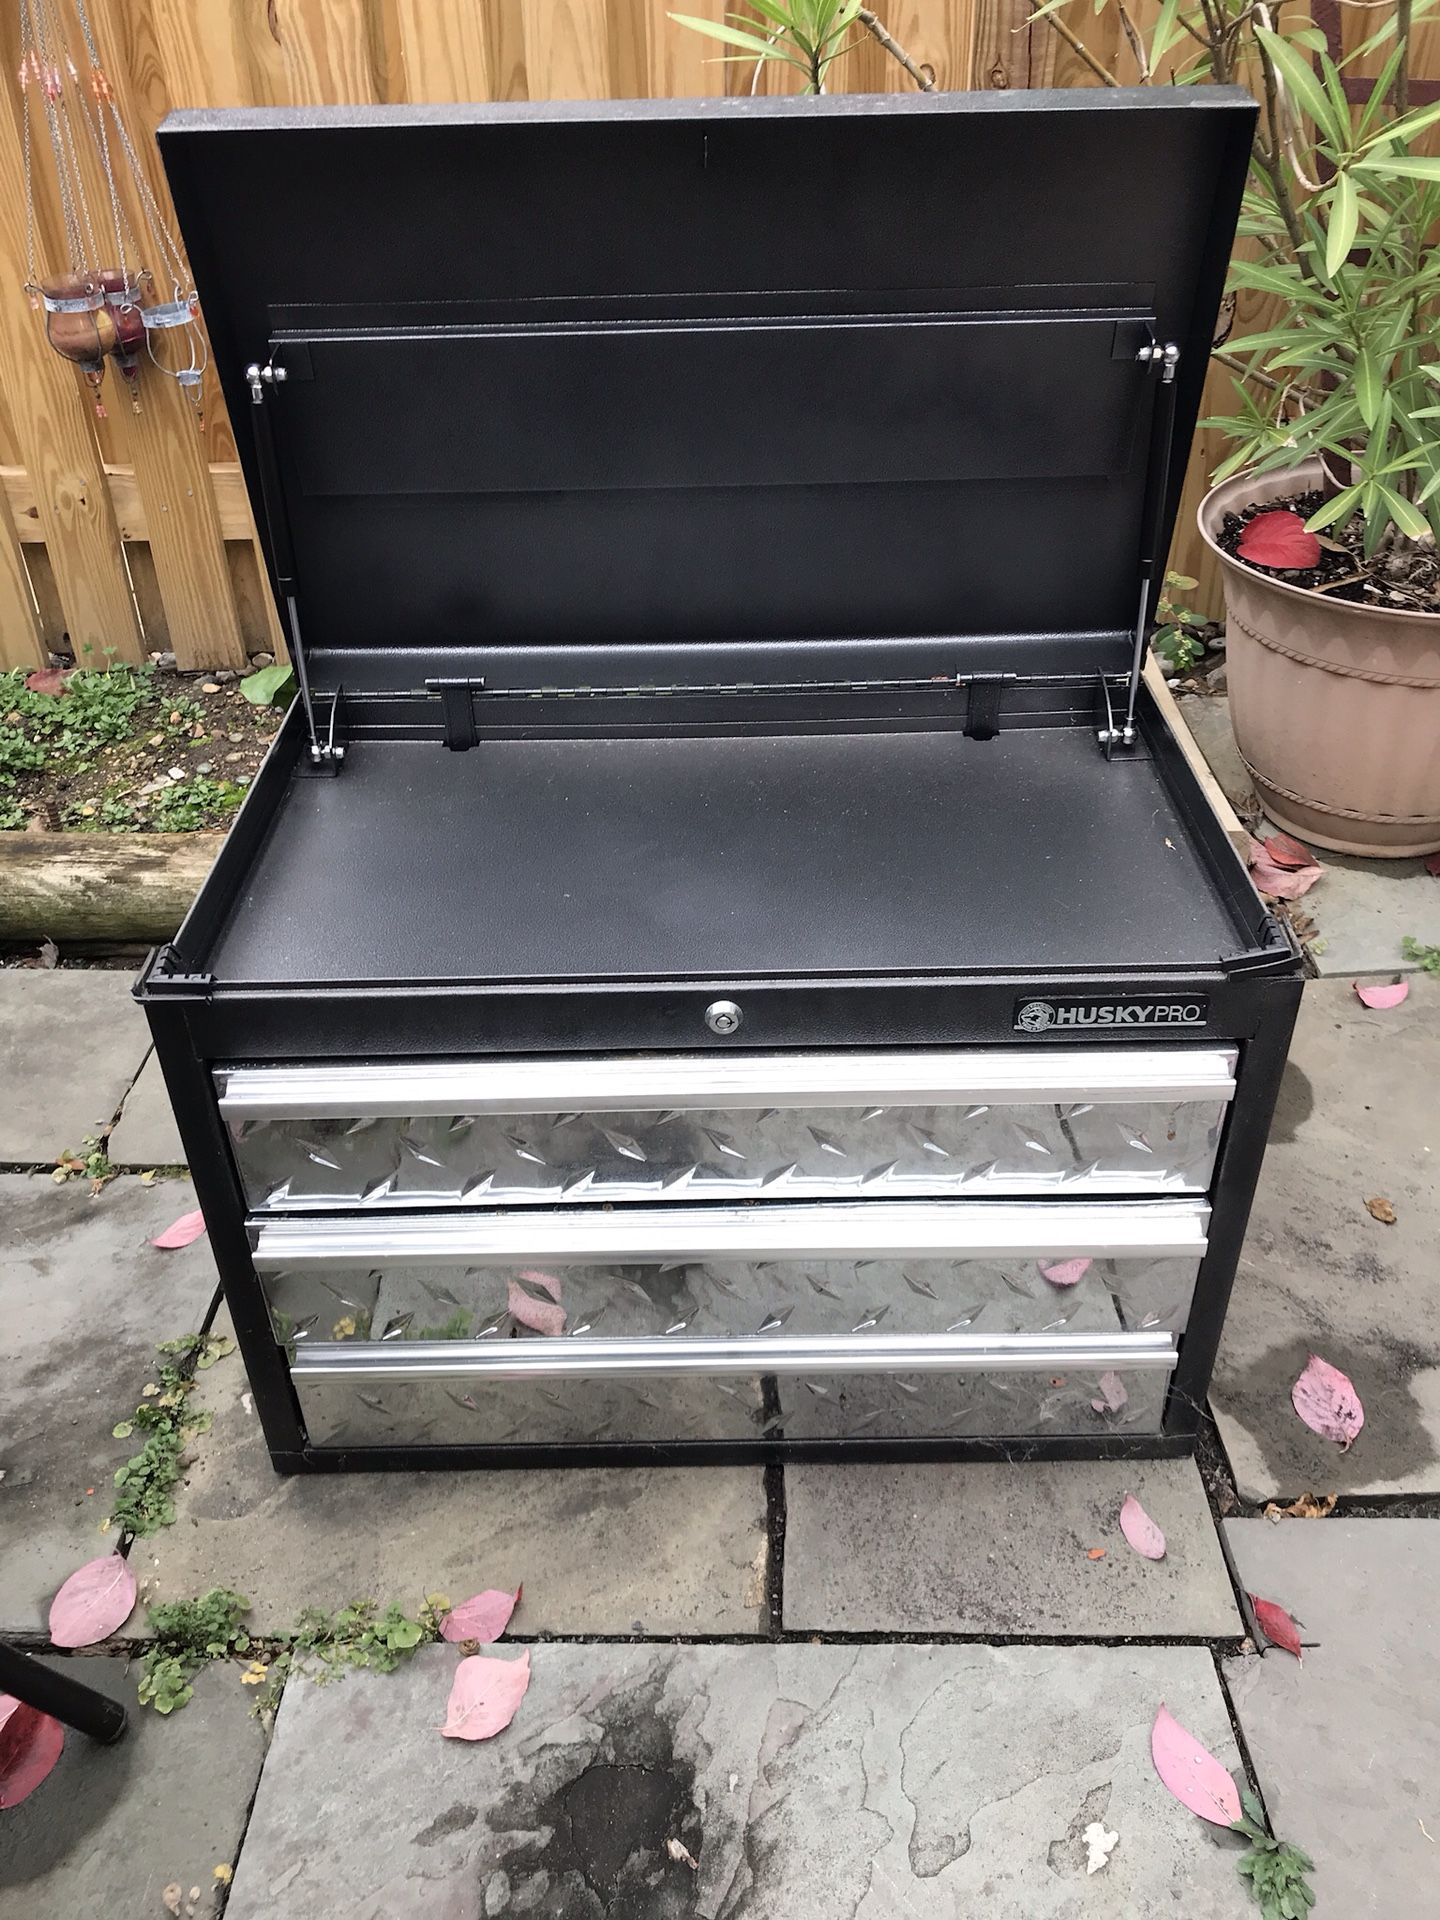 HuskyPro portable and lockable tool chest.